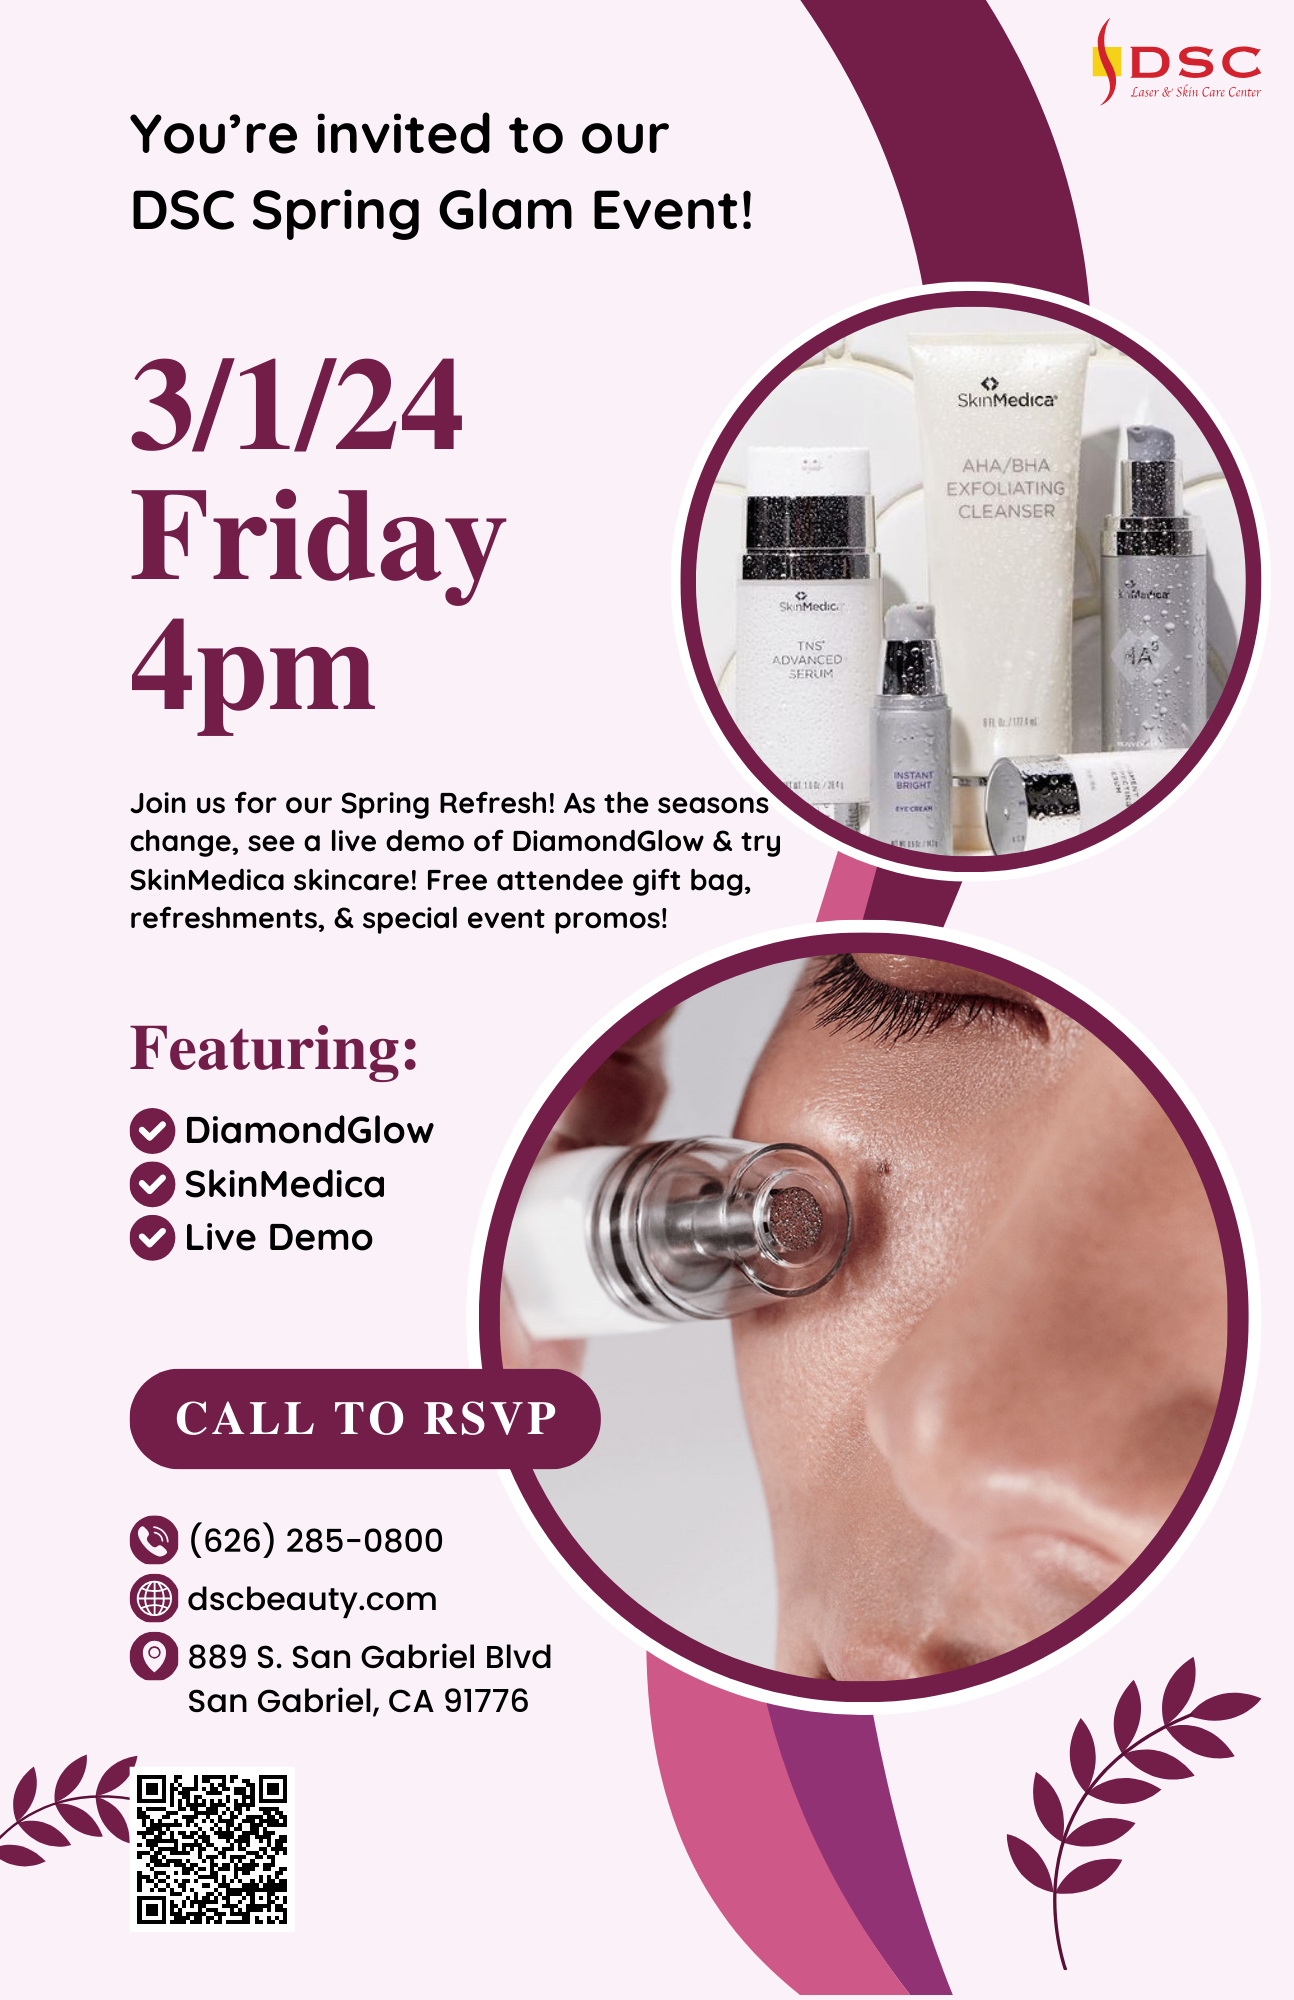 DSC 3/1/2024 Spring Glam Event Flyer with DiamondGlow and SkinMedica on purple background with date, time, place and description of event